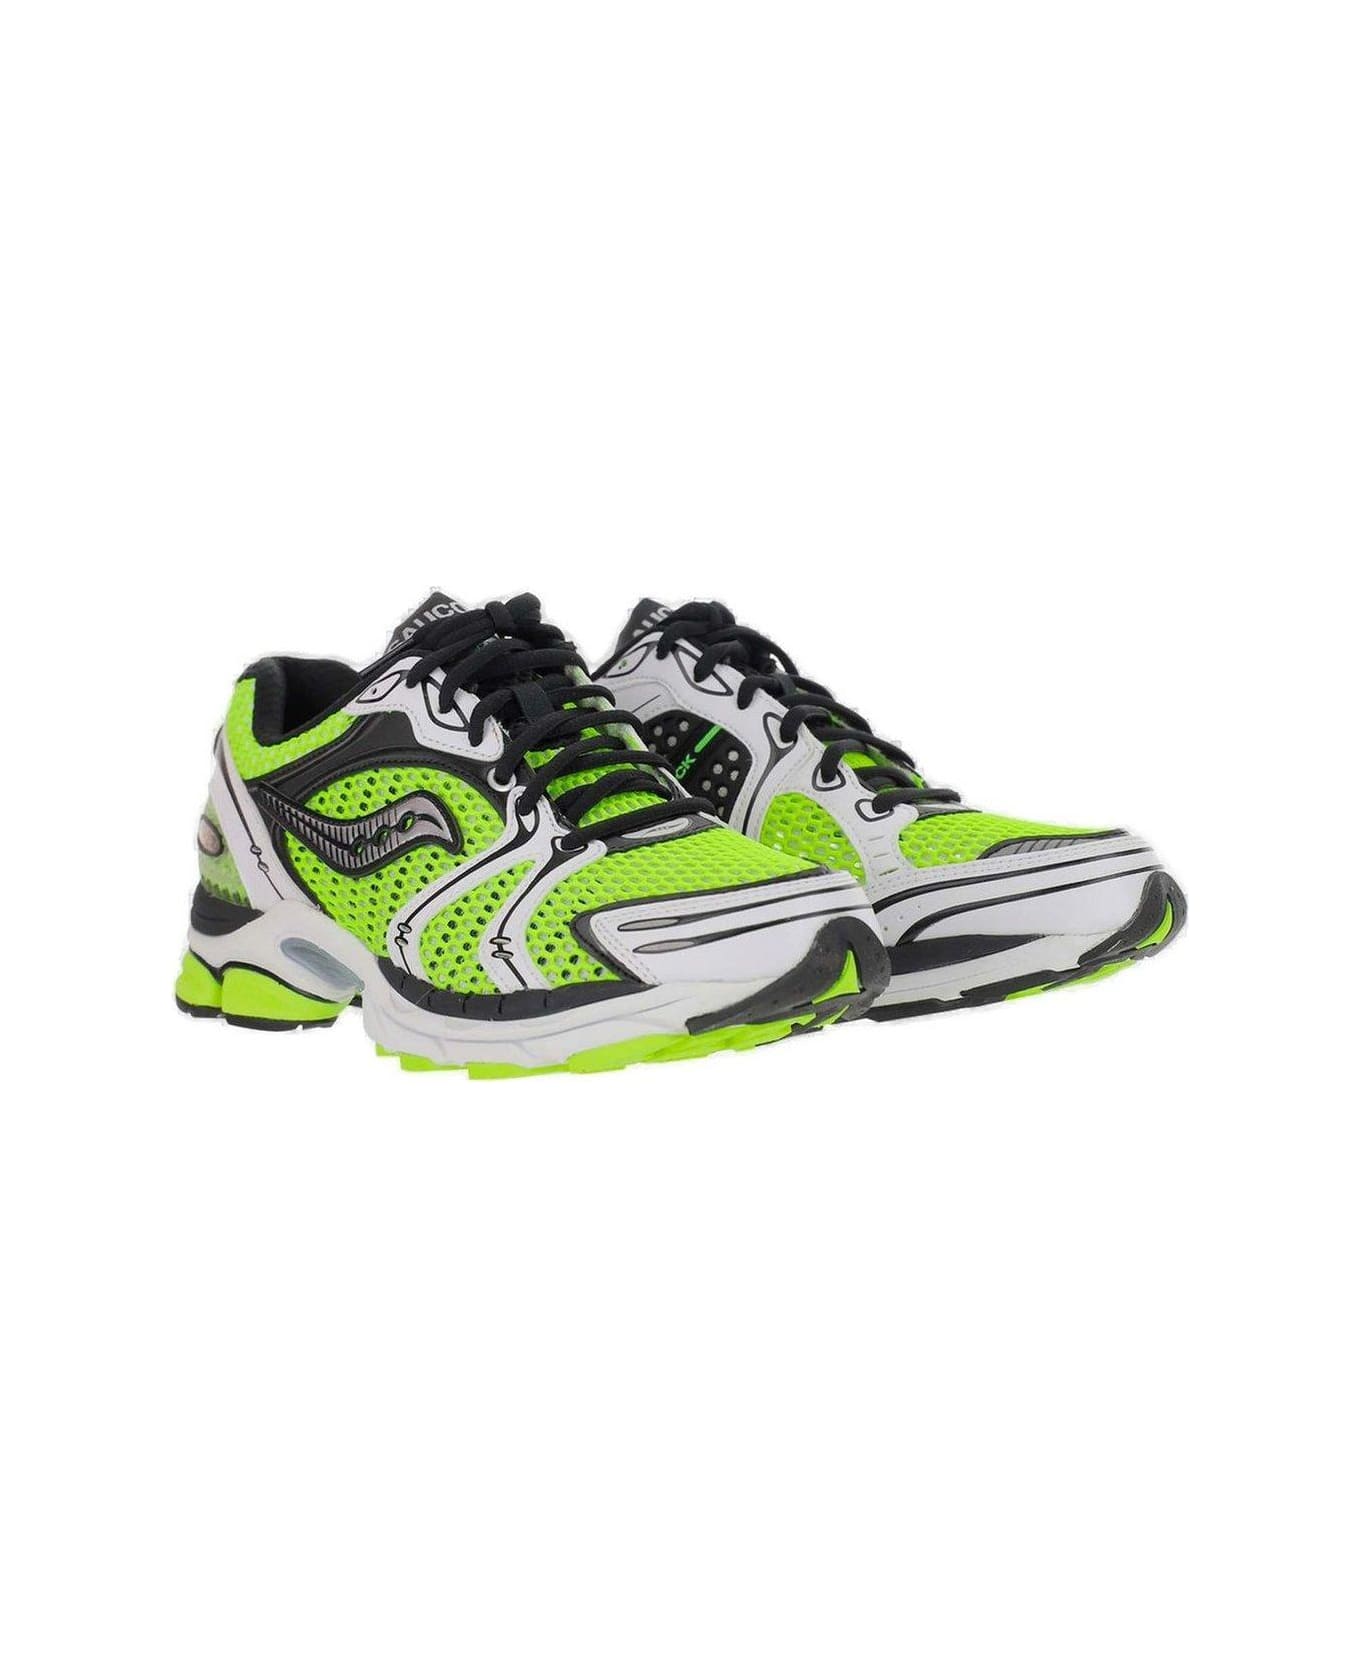 Saucony Progrid Triumph 4 Sneakers Sneakers - YELLOW